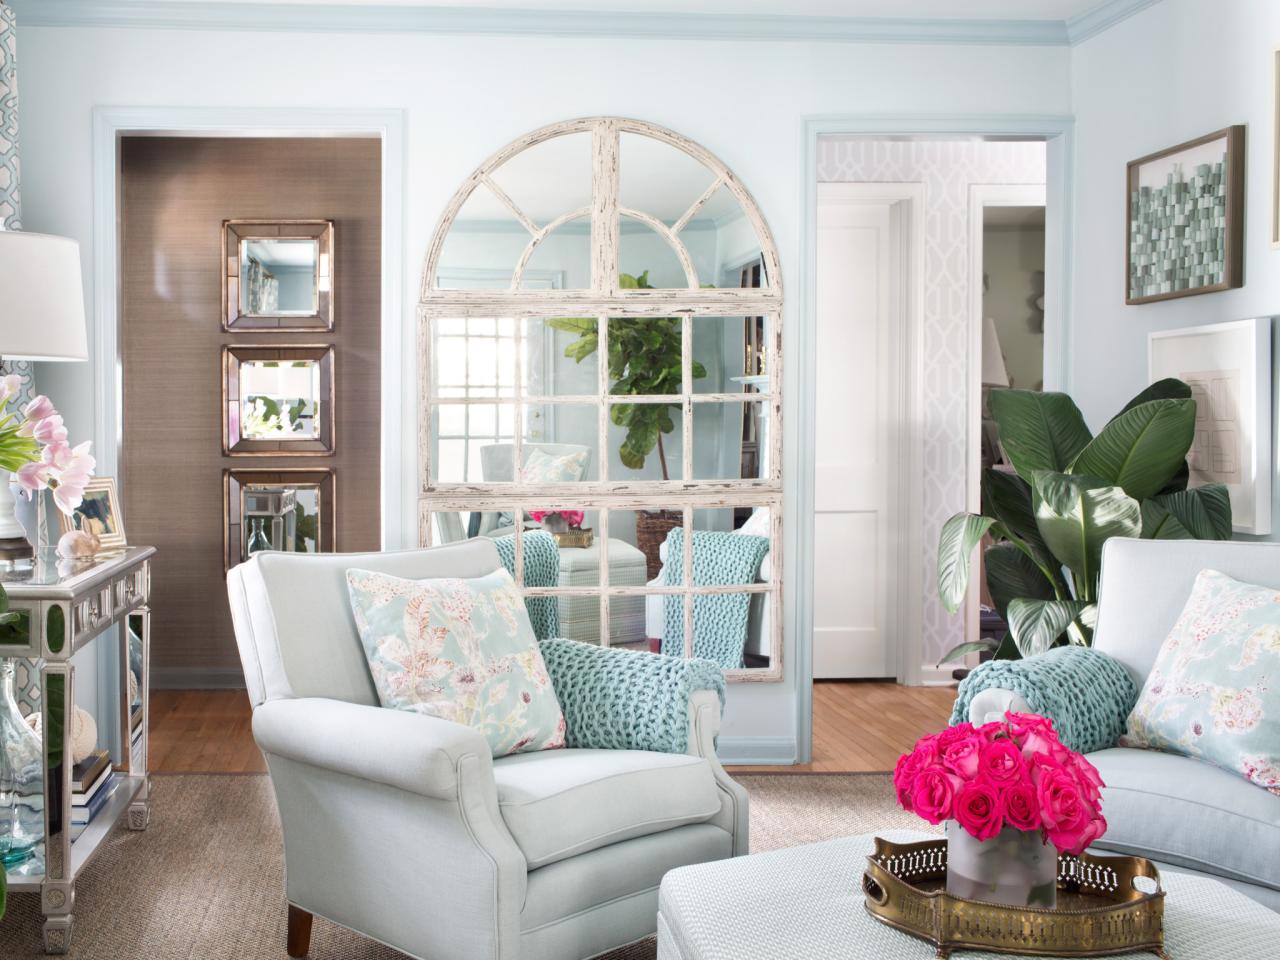 A living room with blue walls, white furniture, and mirrors for added visual depth.